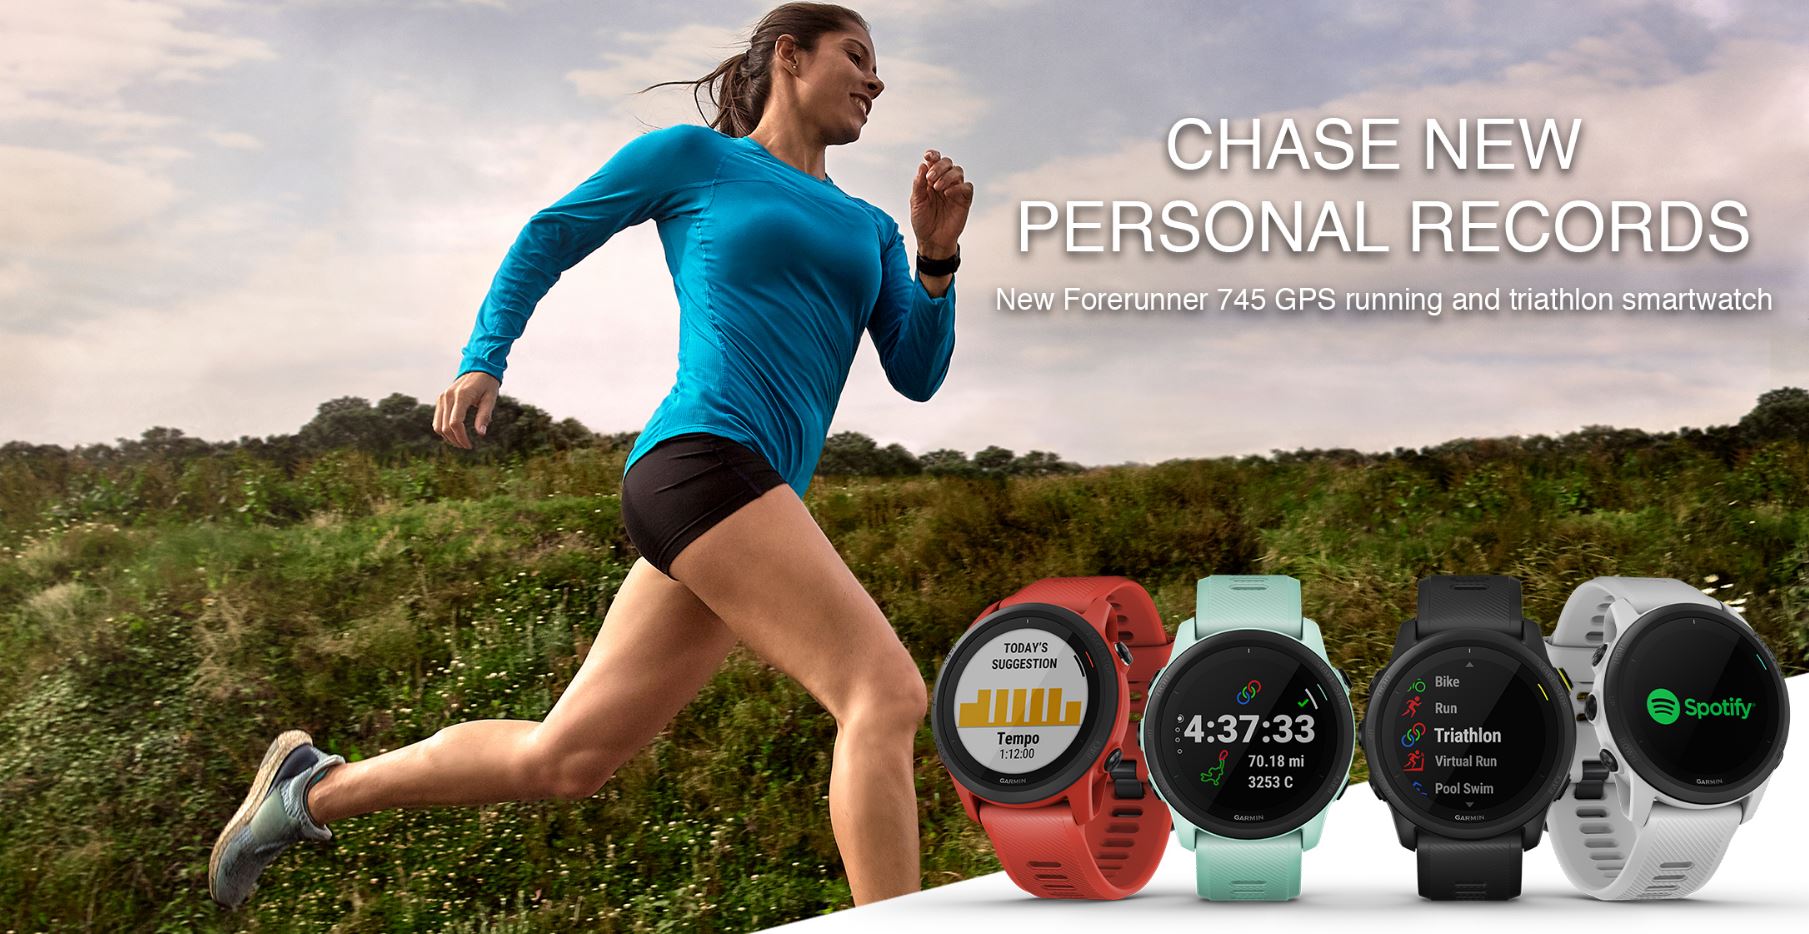 Garmin Forerunner 745 released with over-the-top tracking